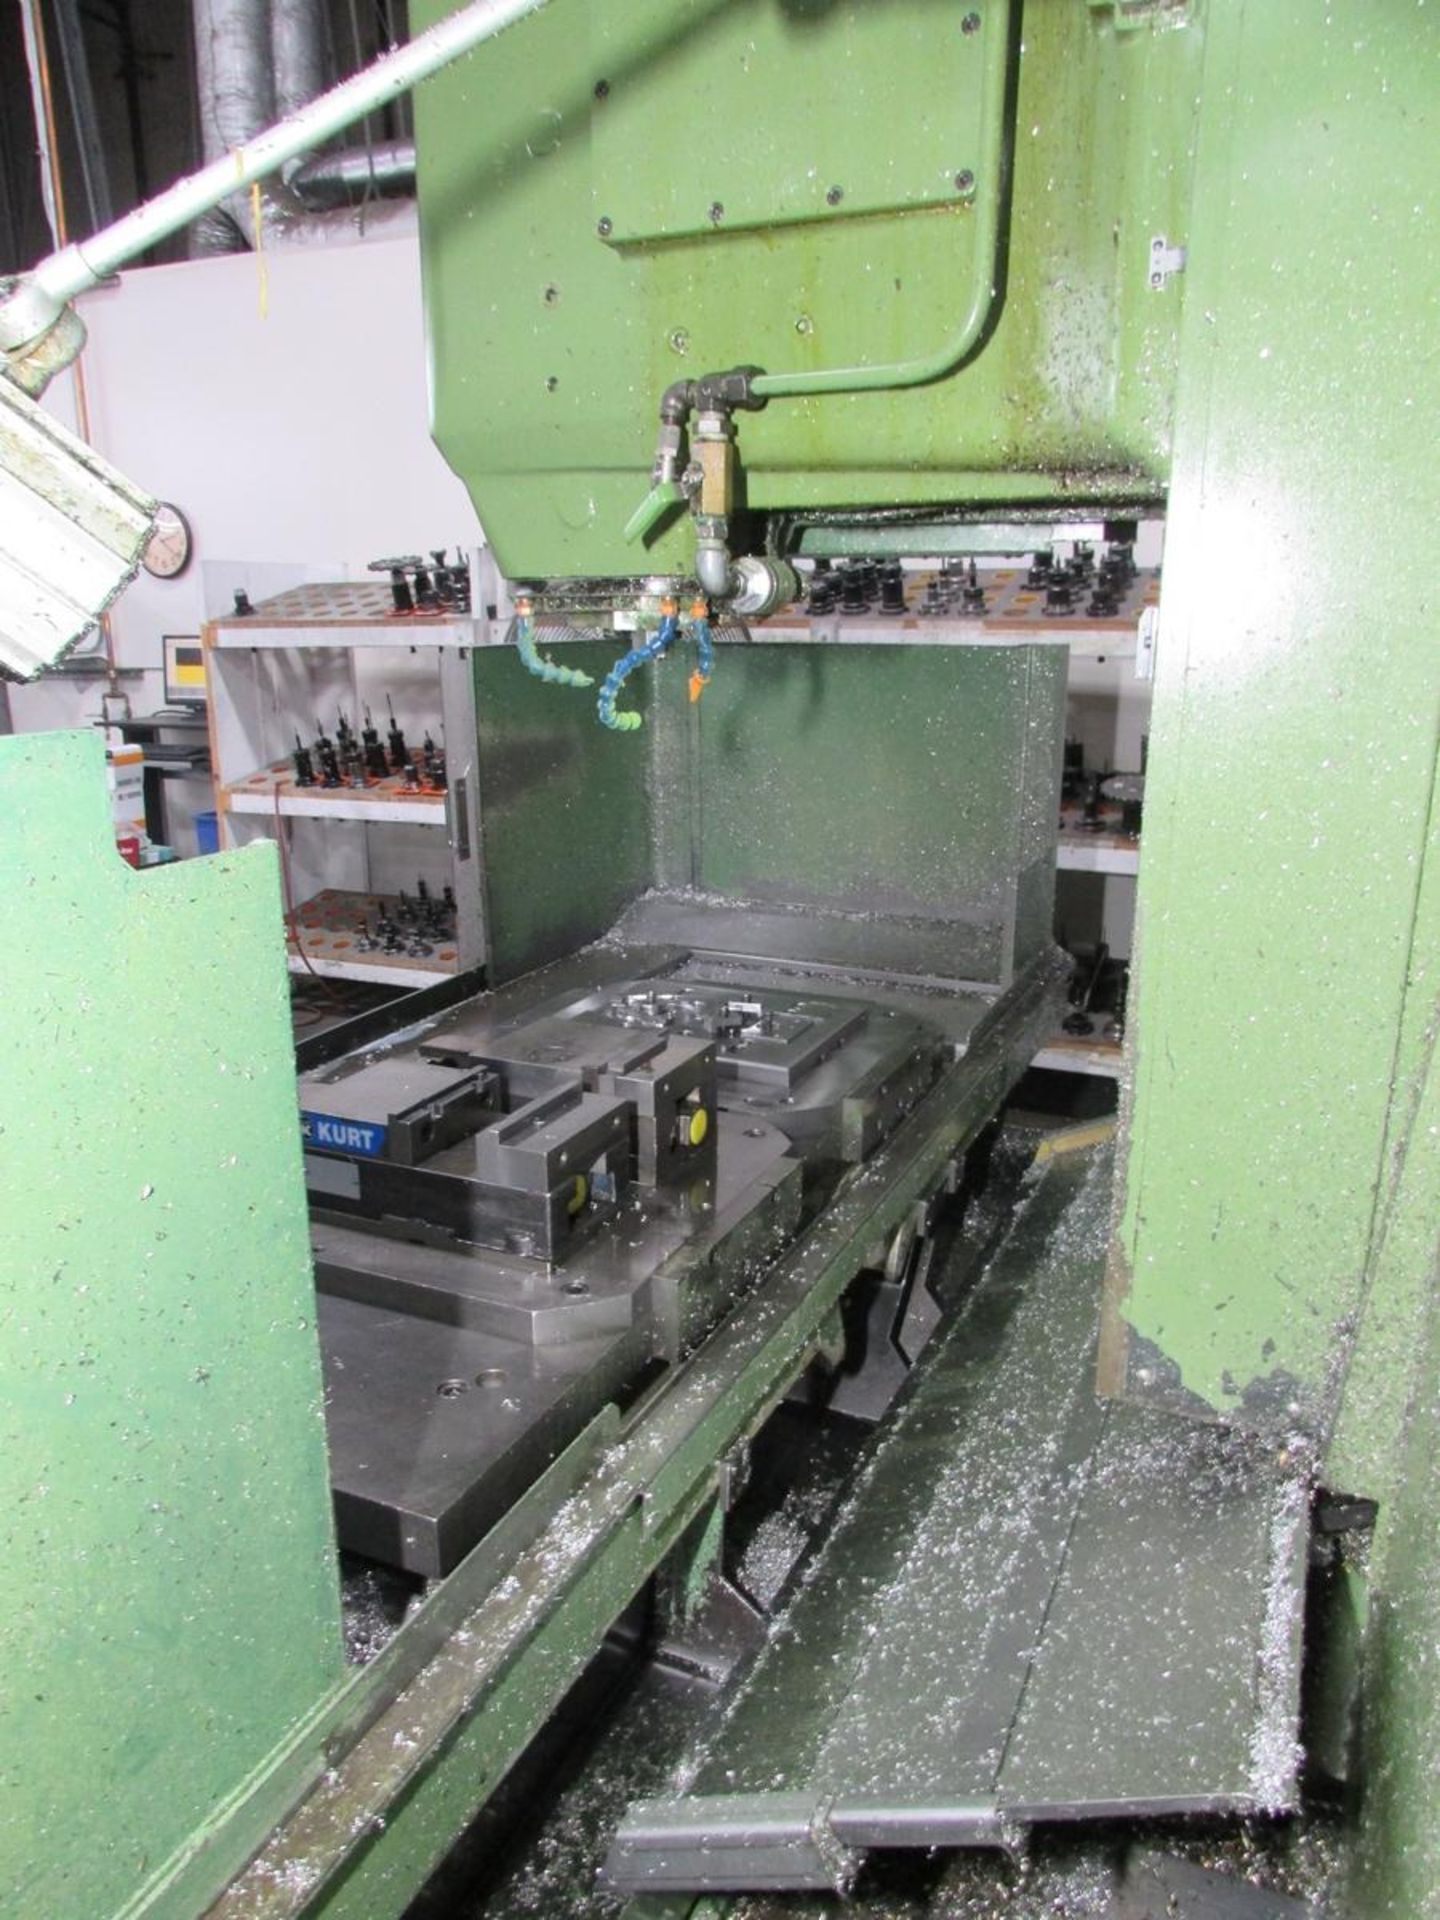 OKK MCV 520 3-Axis CNC Vertical Maching Center - Image 18 of 28